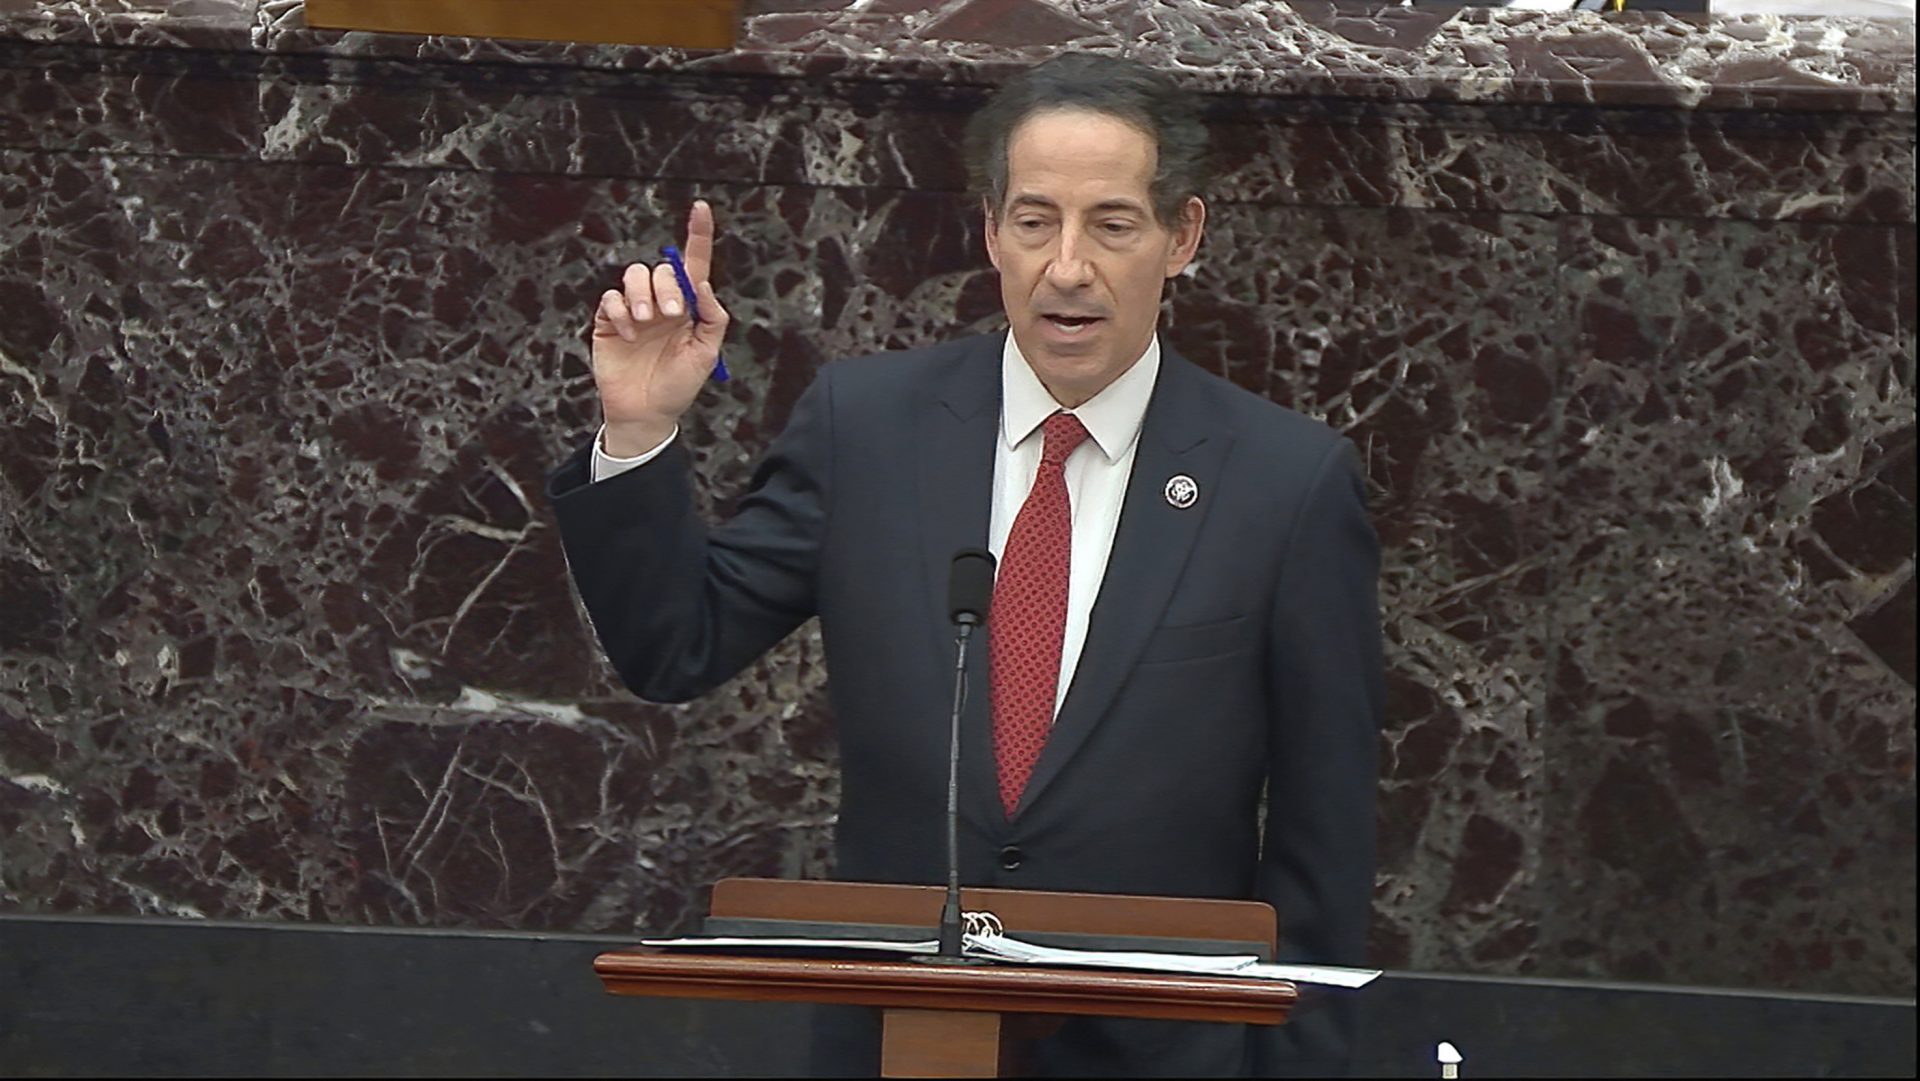 In this image from video, House impeachment manager Rep. Jamie Raskin, D-Md., speaks during the second impeachment trial of former President Donald Trump in the Senate at the U.S. Capitol in Washington, Tuesday, Feb. 9, 2021.